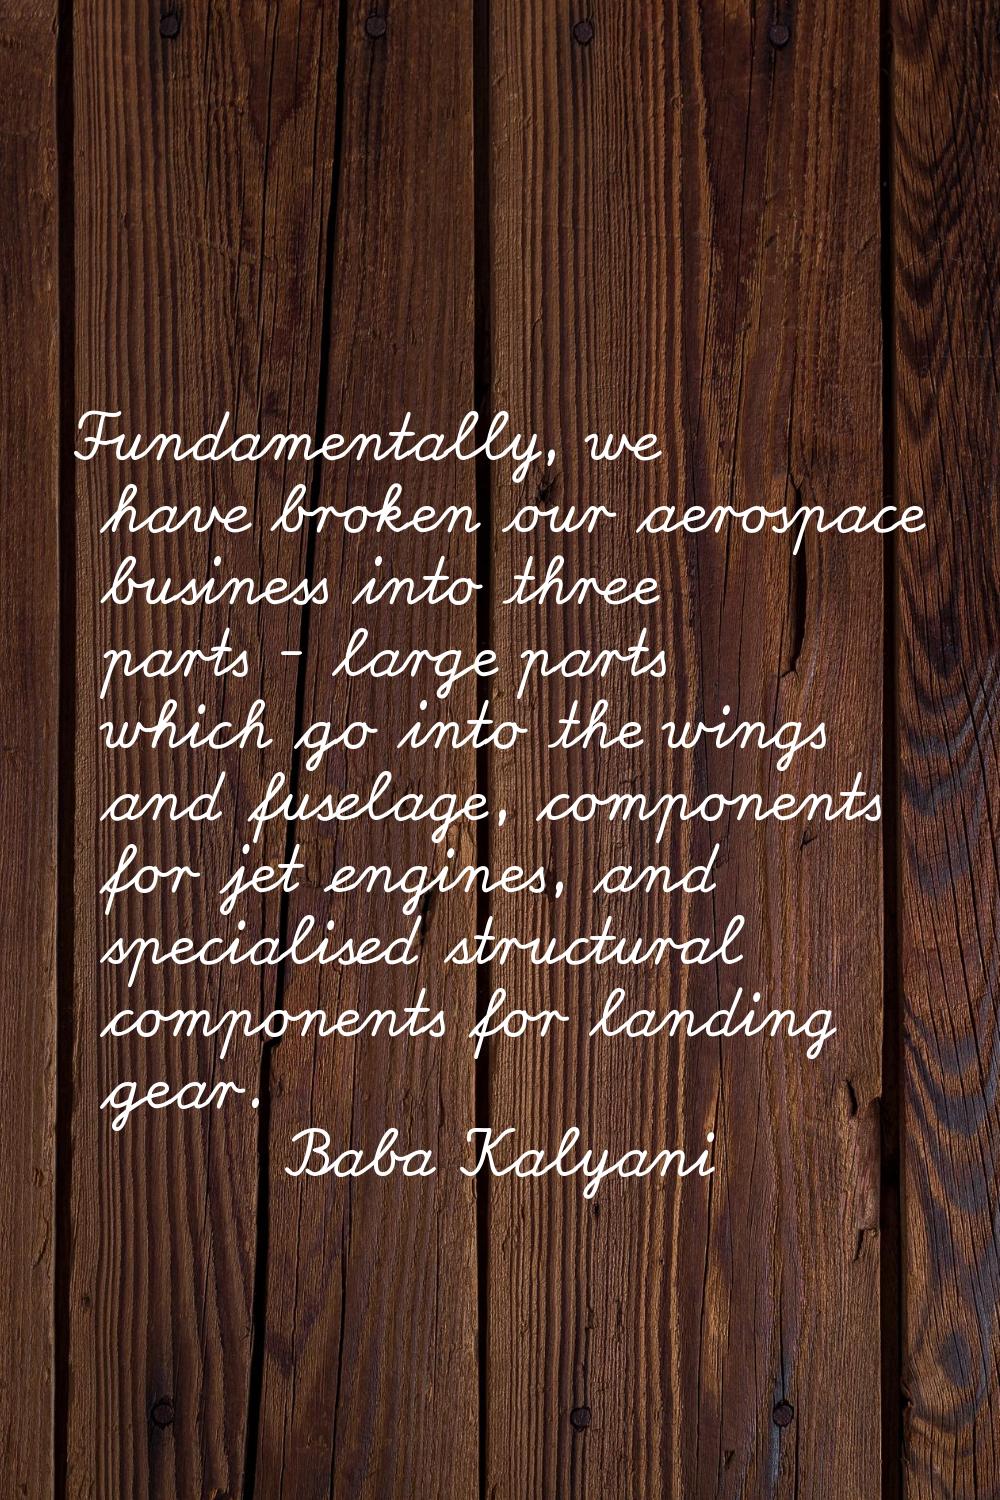 Fundamentally, we have broken our aerospace business into three parts - large parts which go into t